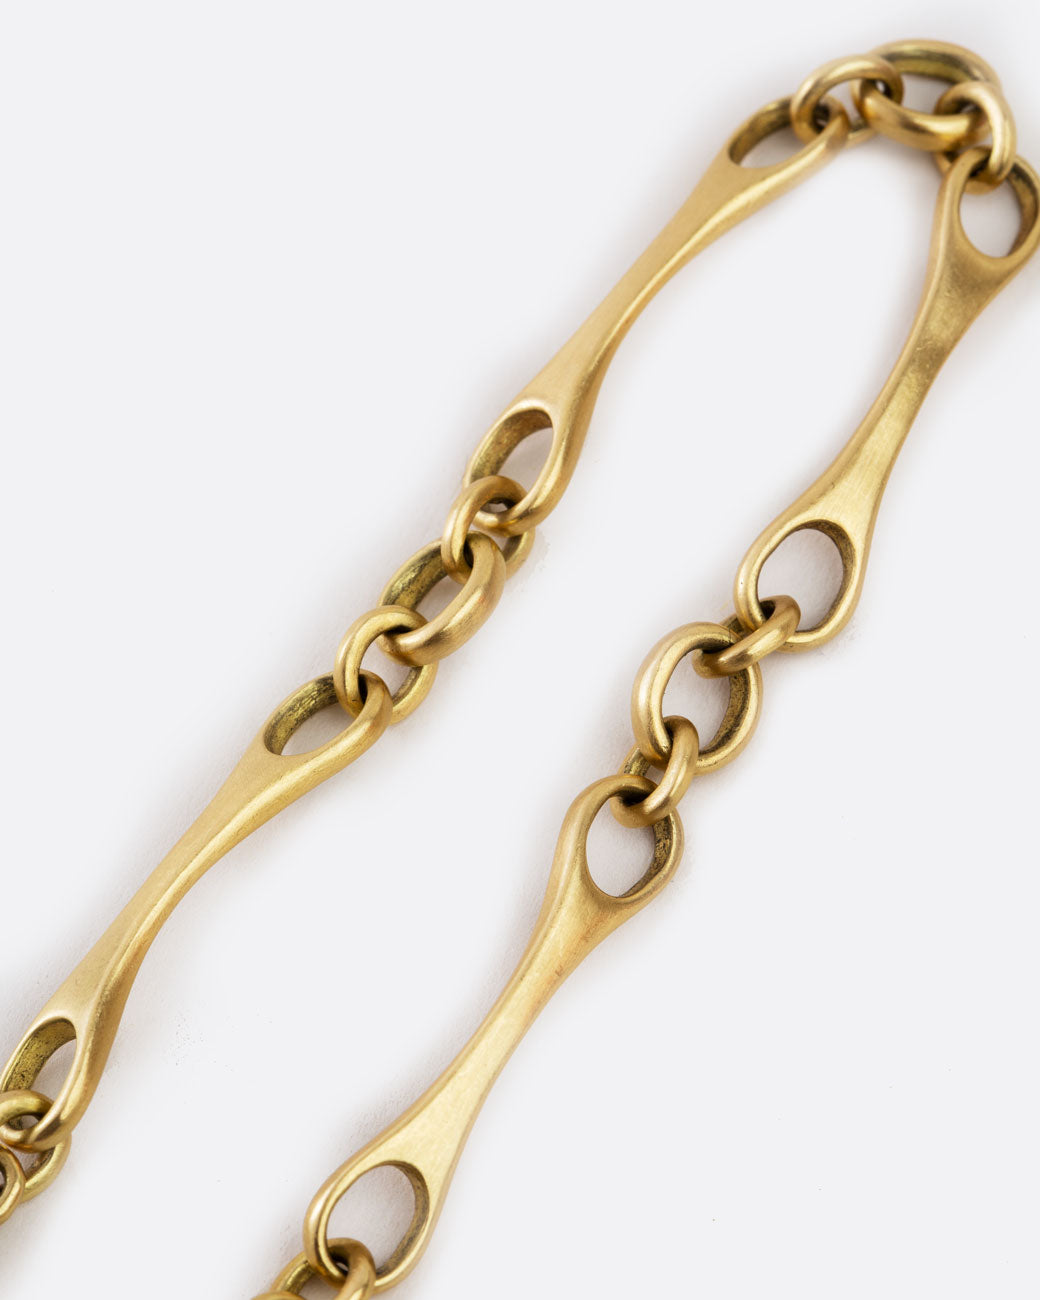 close up of bracelet made of four matte brushed yellow gold long links